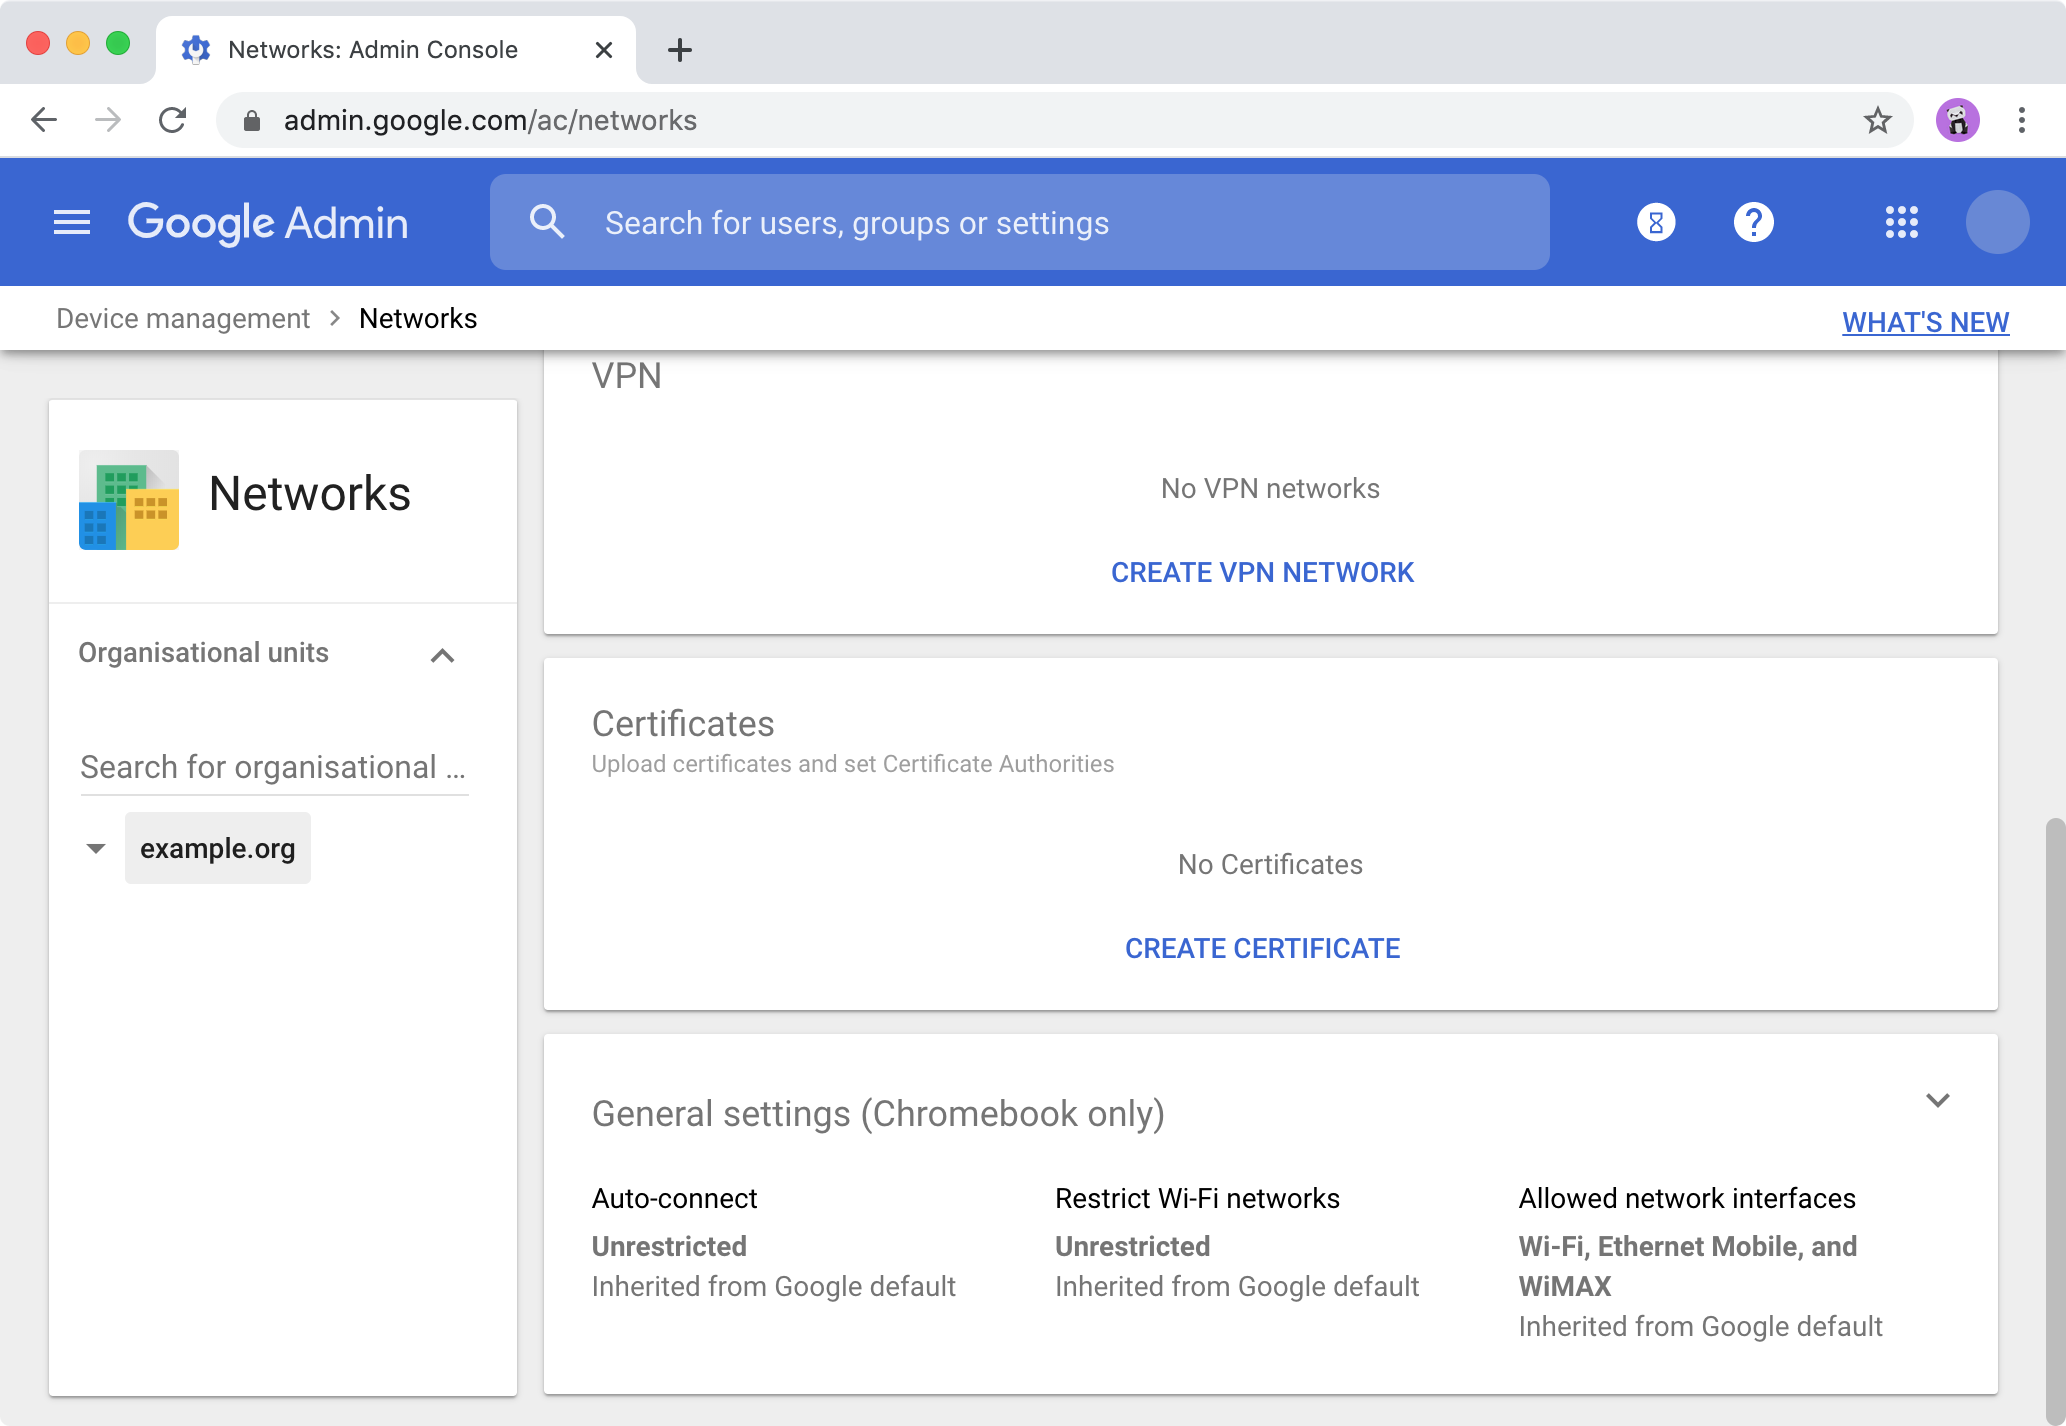 Google Admin console > Device management > Networks